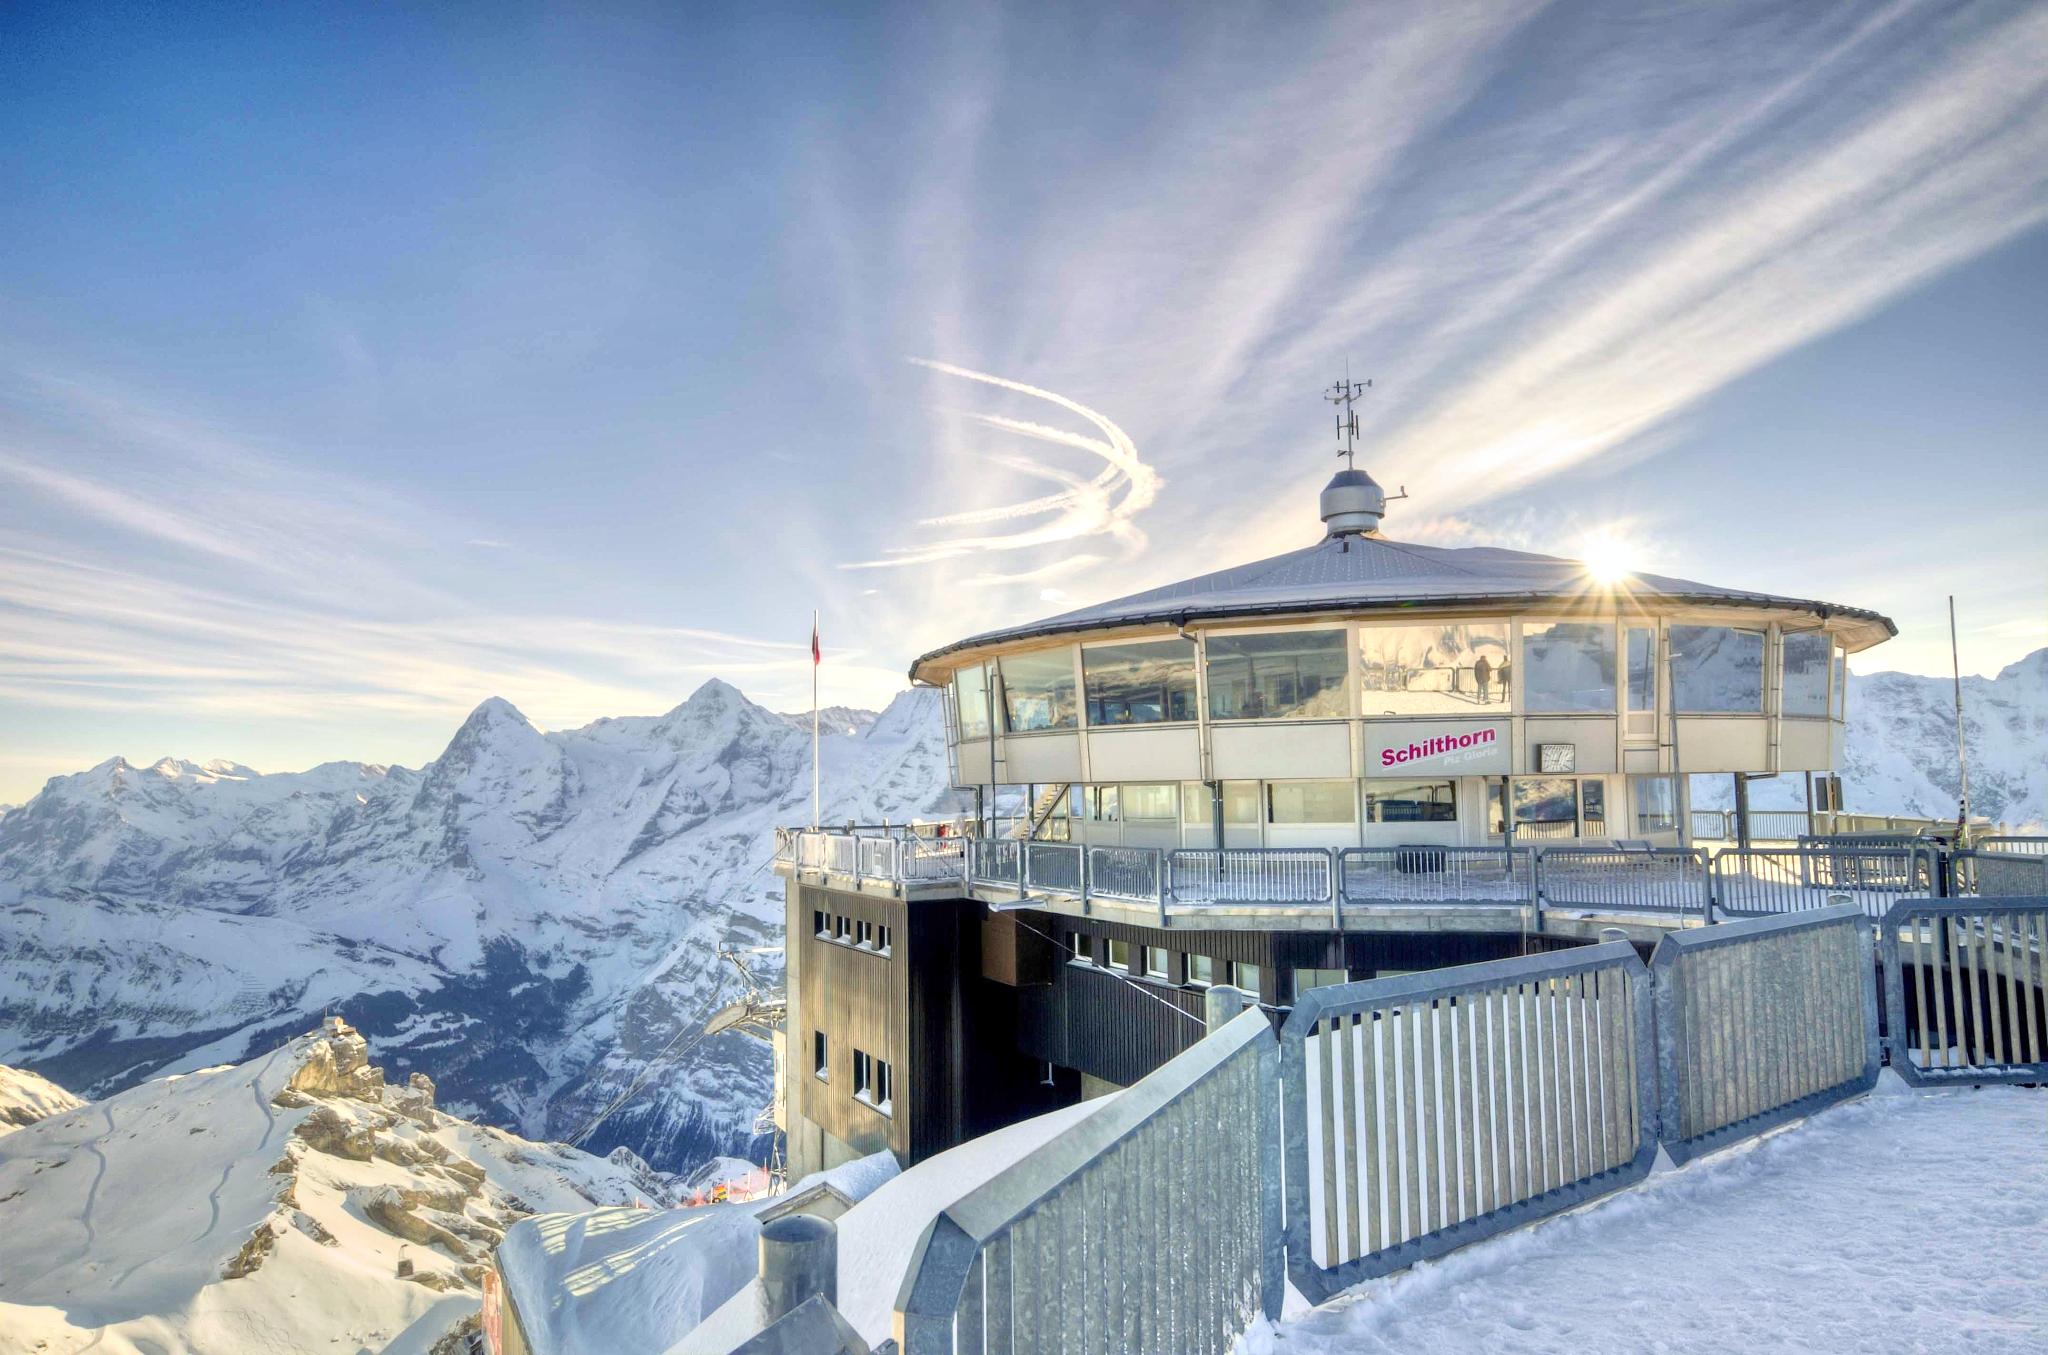 Schilthorn attraction reviews - Schilthorn tickets - Schilthorn discounts - Schilthorn transportation, address, opening hours - attractions, hotels, and food near Schilthorn - Trip.com